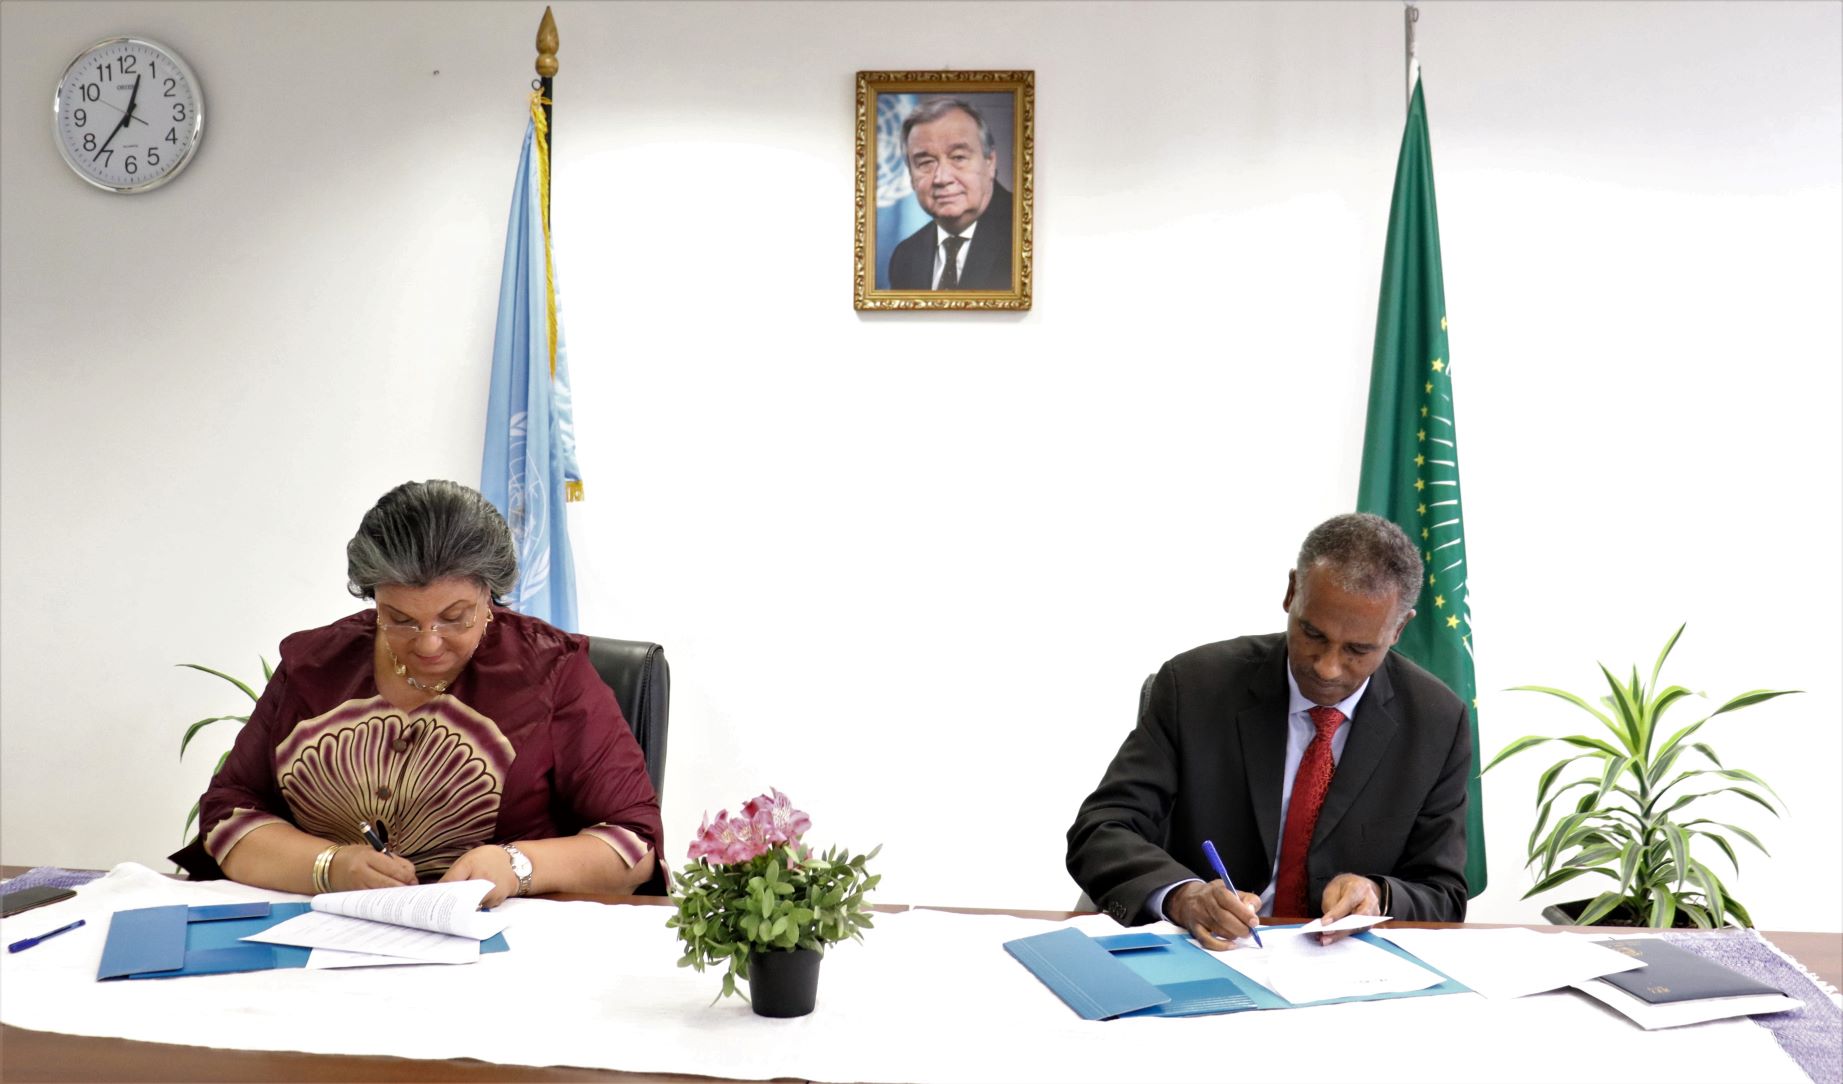 IPSS-UNOAU sign MoU to enhance collaboration on peace and security issues in Africa